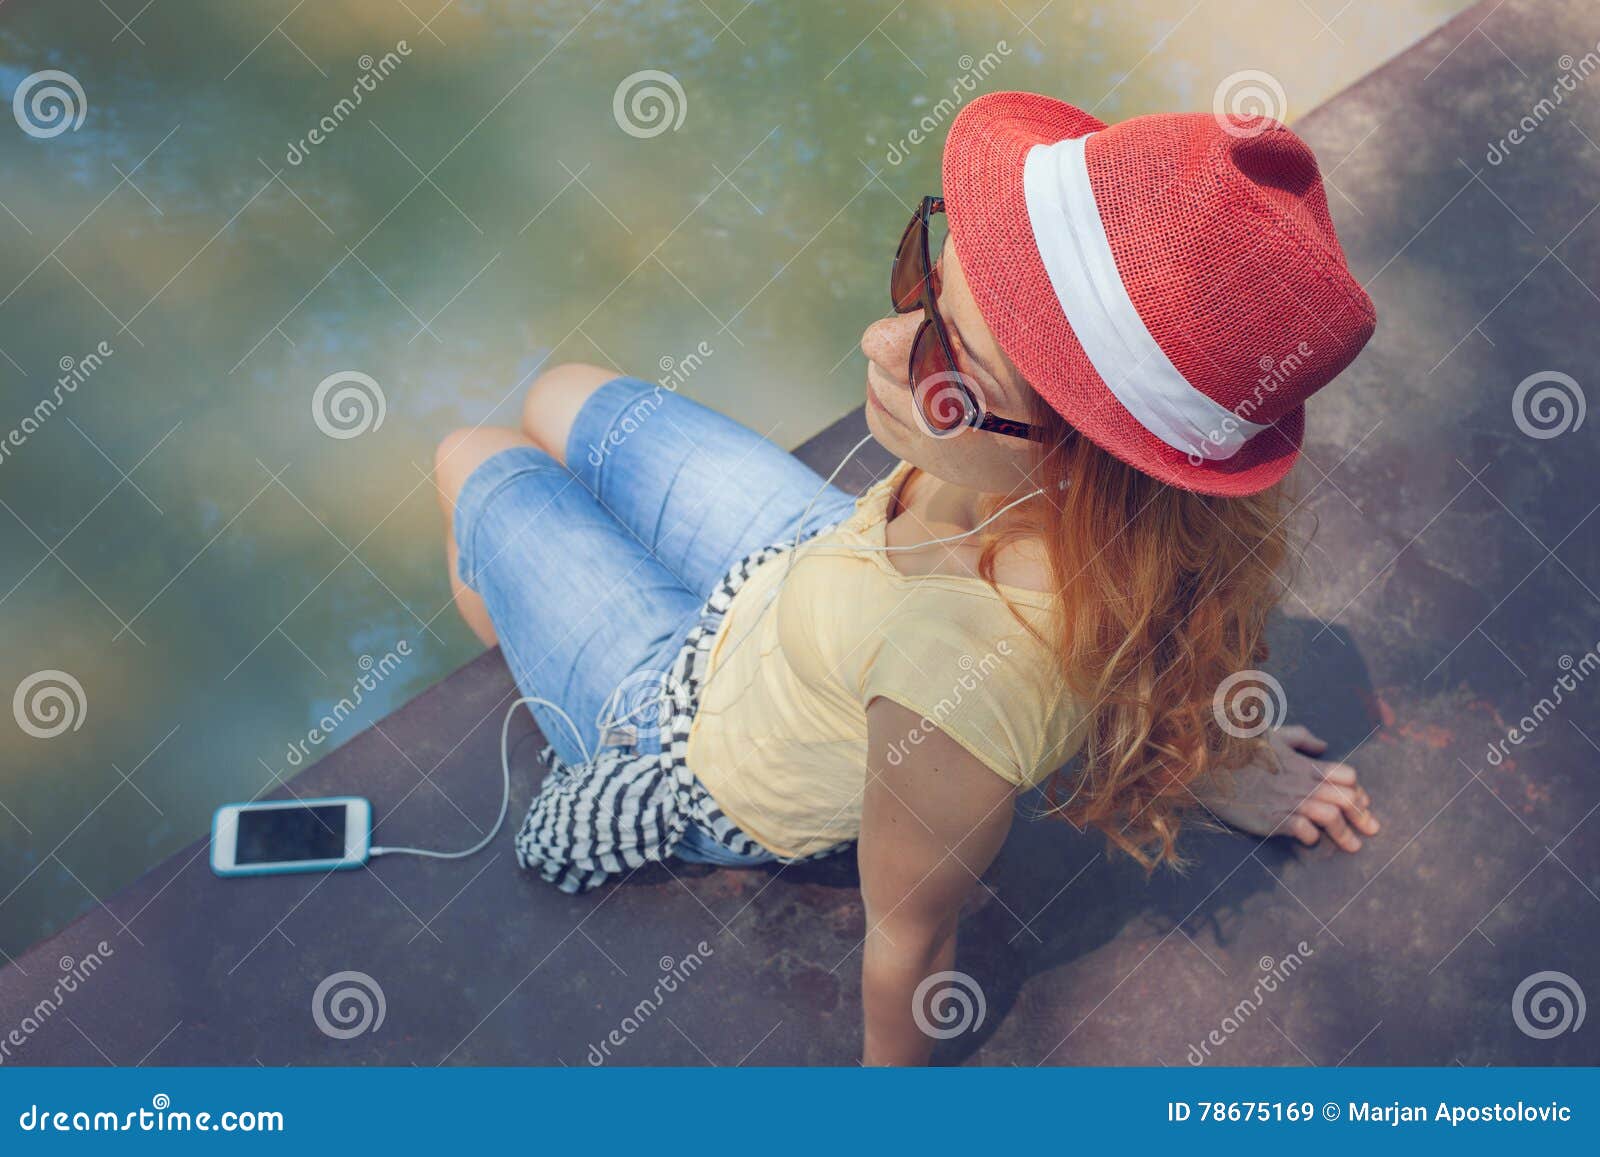 young woman using a smart phone